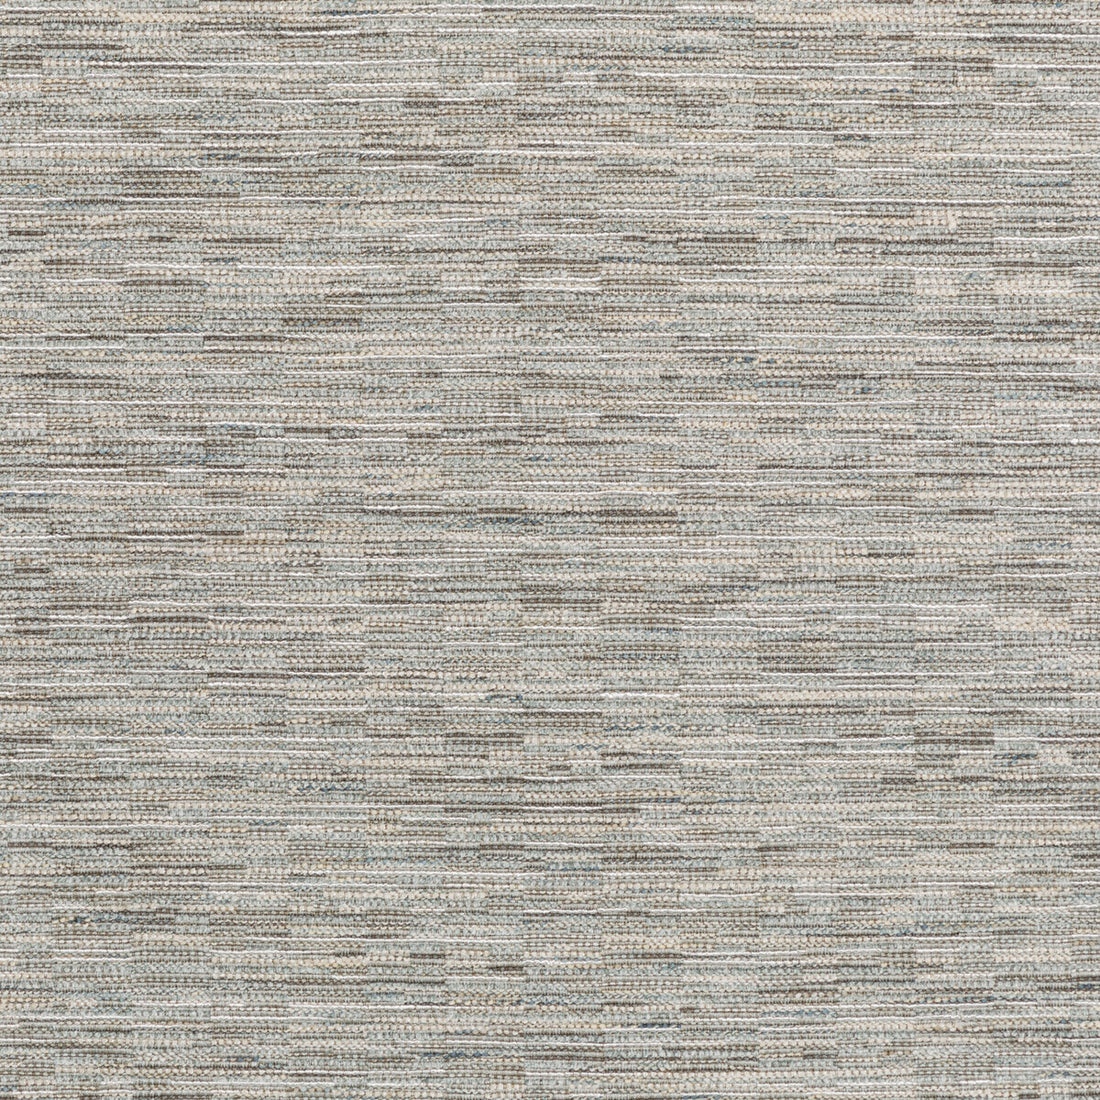 Kravet Couture fabric in 37029-115 color - pattern 37029.115.0 - by Kravet Couture in the Mabley Handler collection